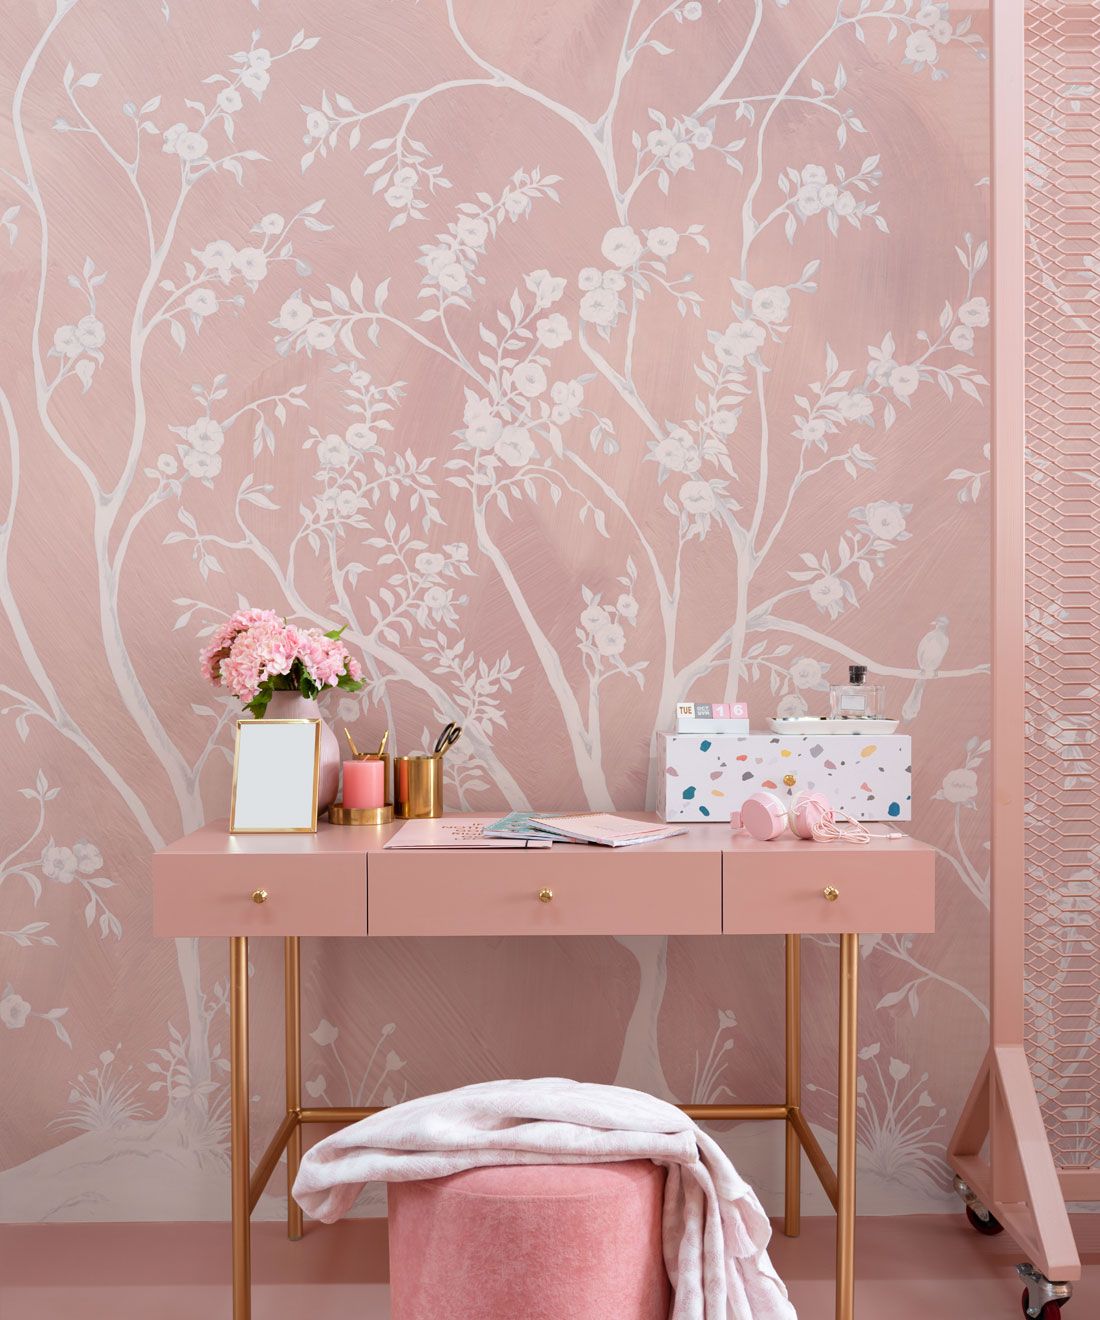 Pink and White Foliage Wallpaper installed in a bedroom